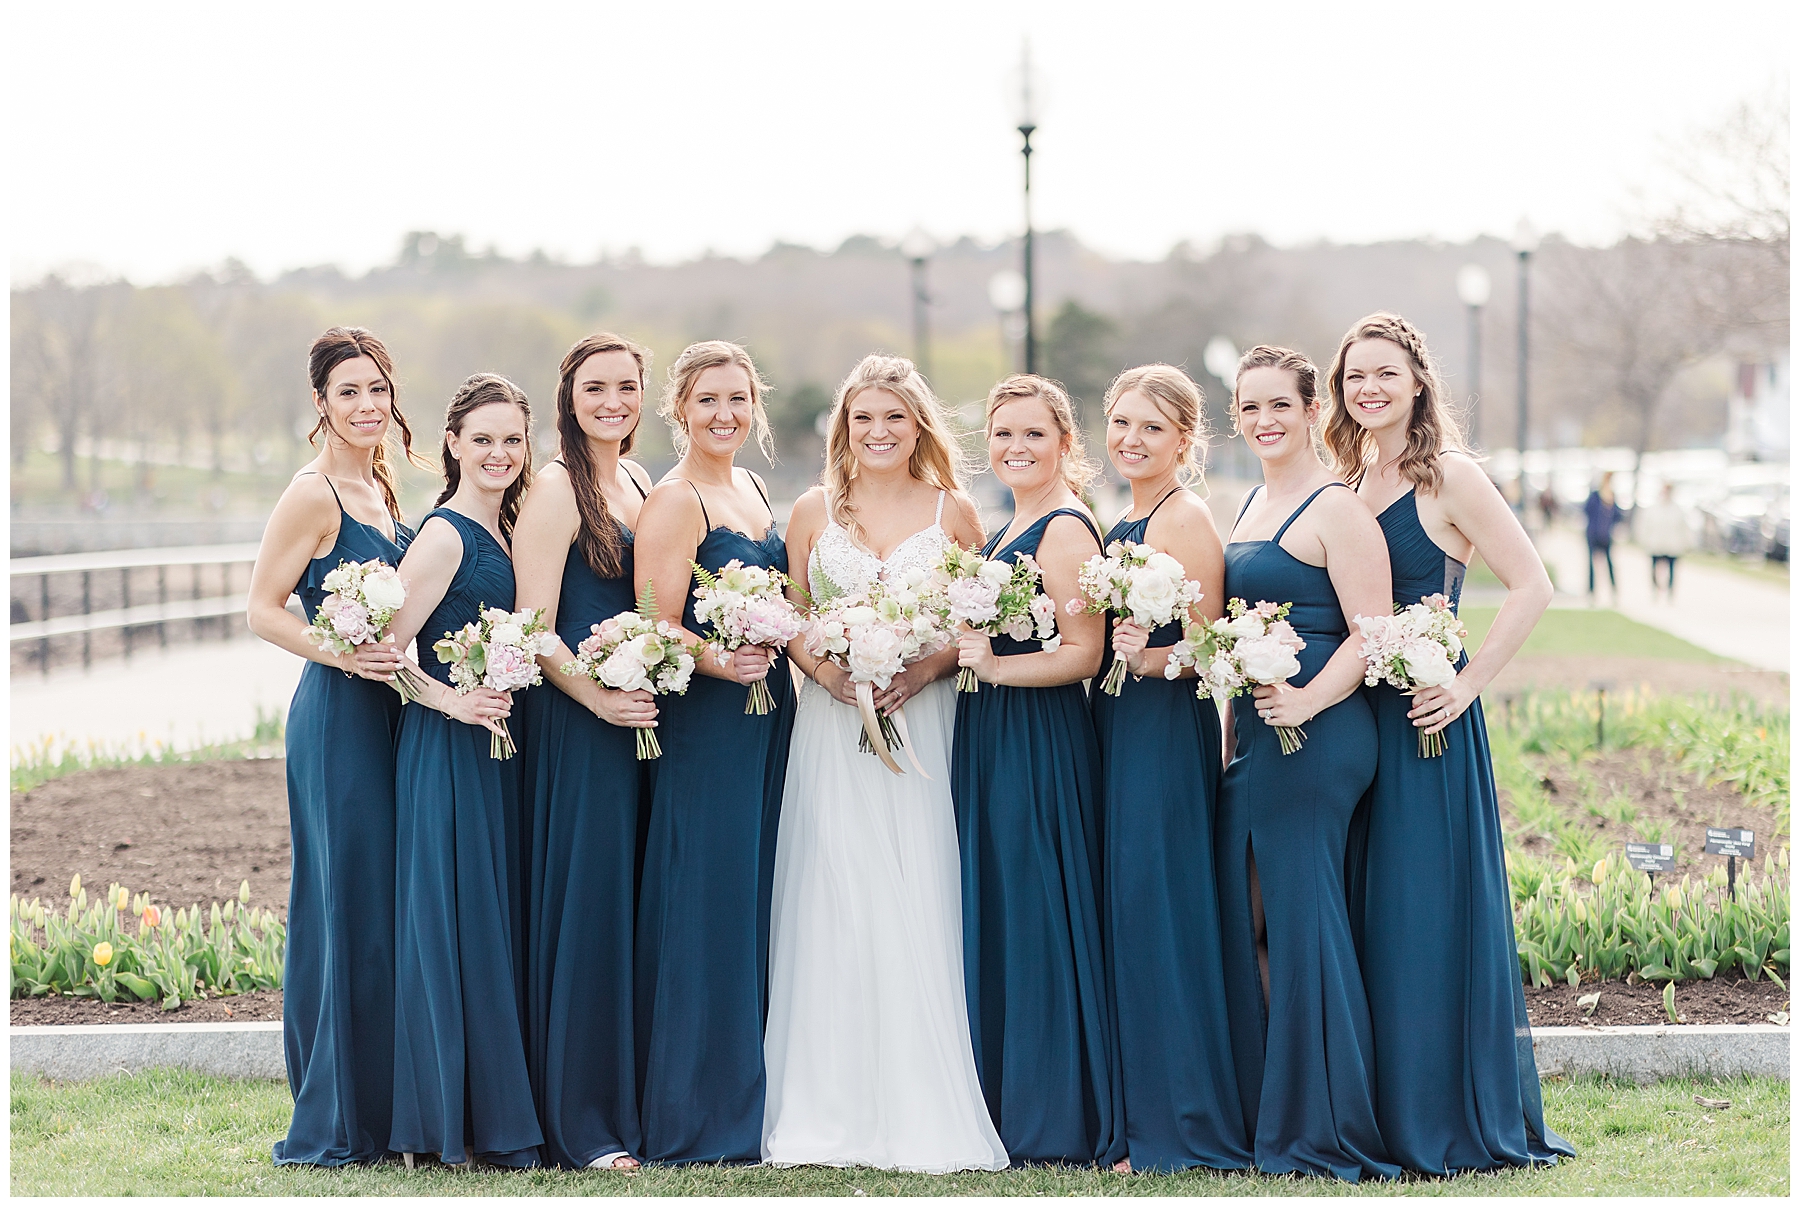 Bride and Bridesmaids stand with flower bouquets before wedding ceremony in Gloucester MA